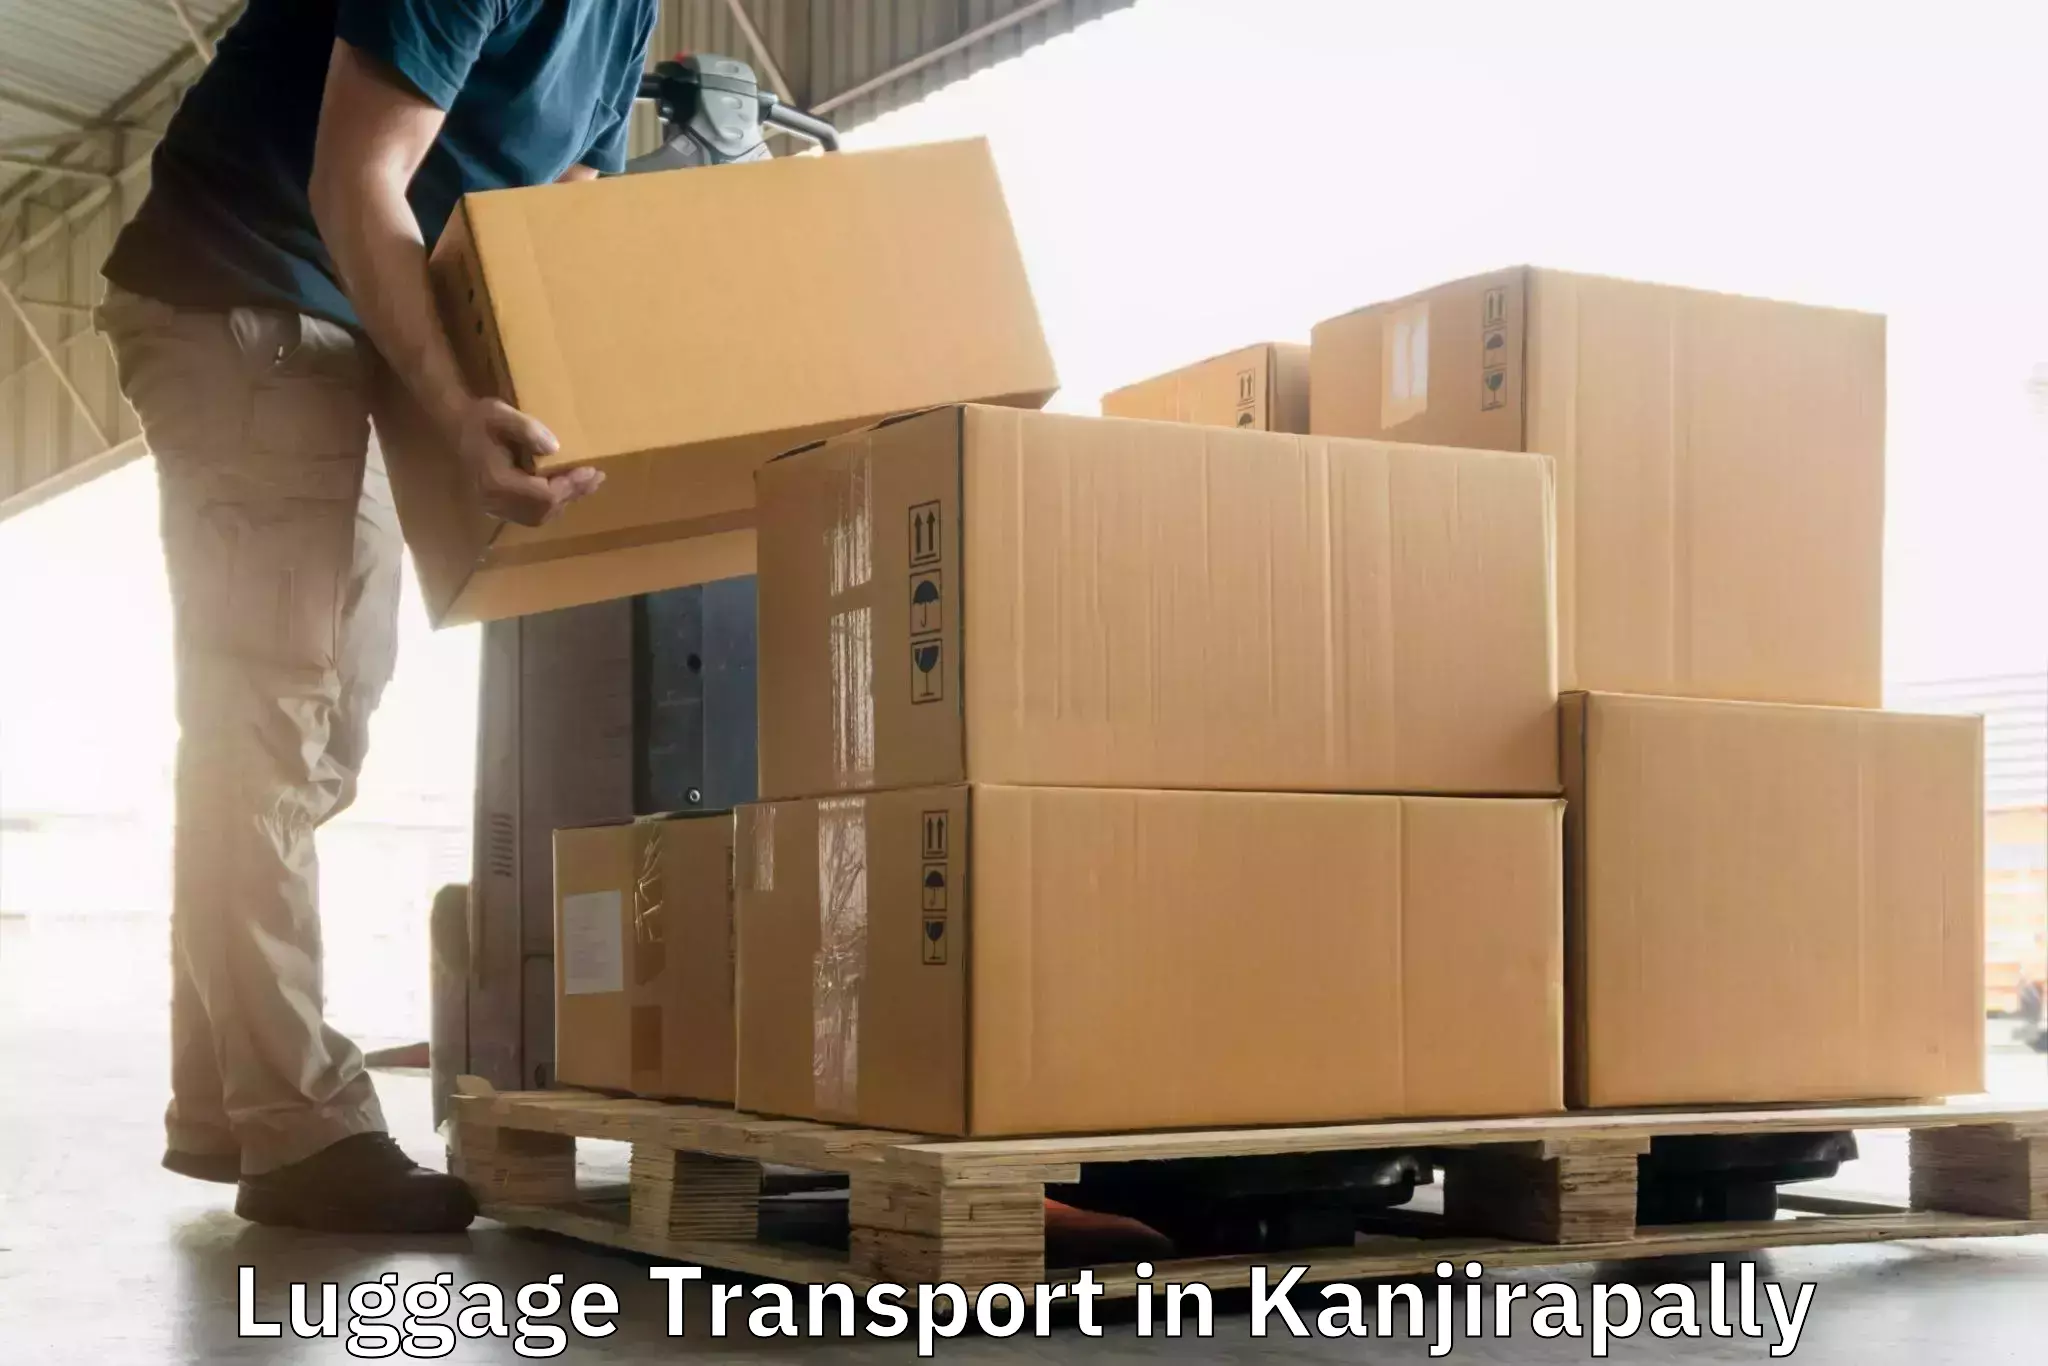 Simplified luggage transport in Kanjirapally